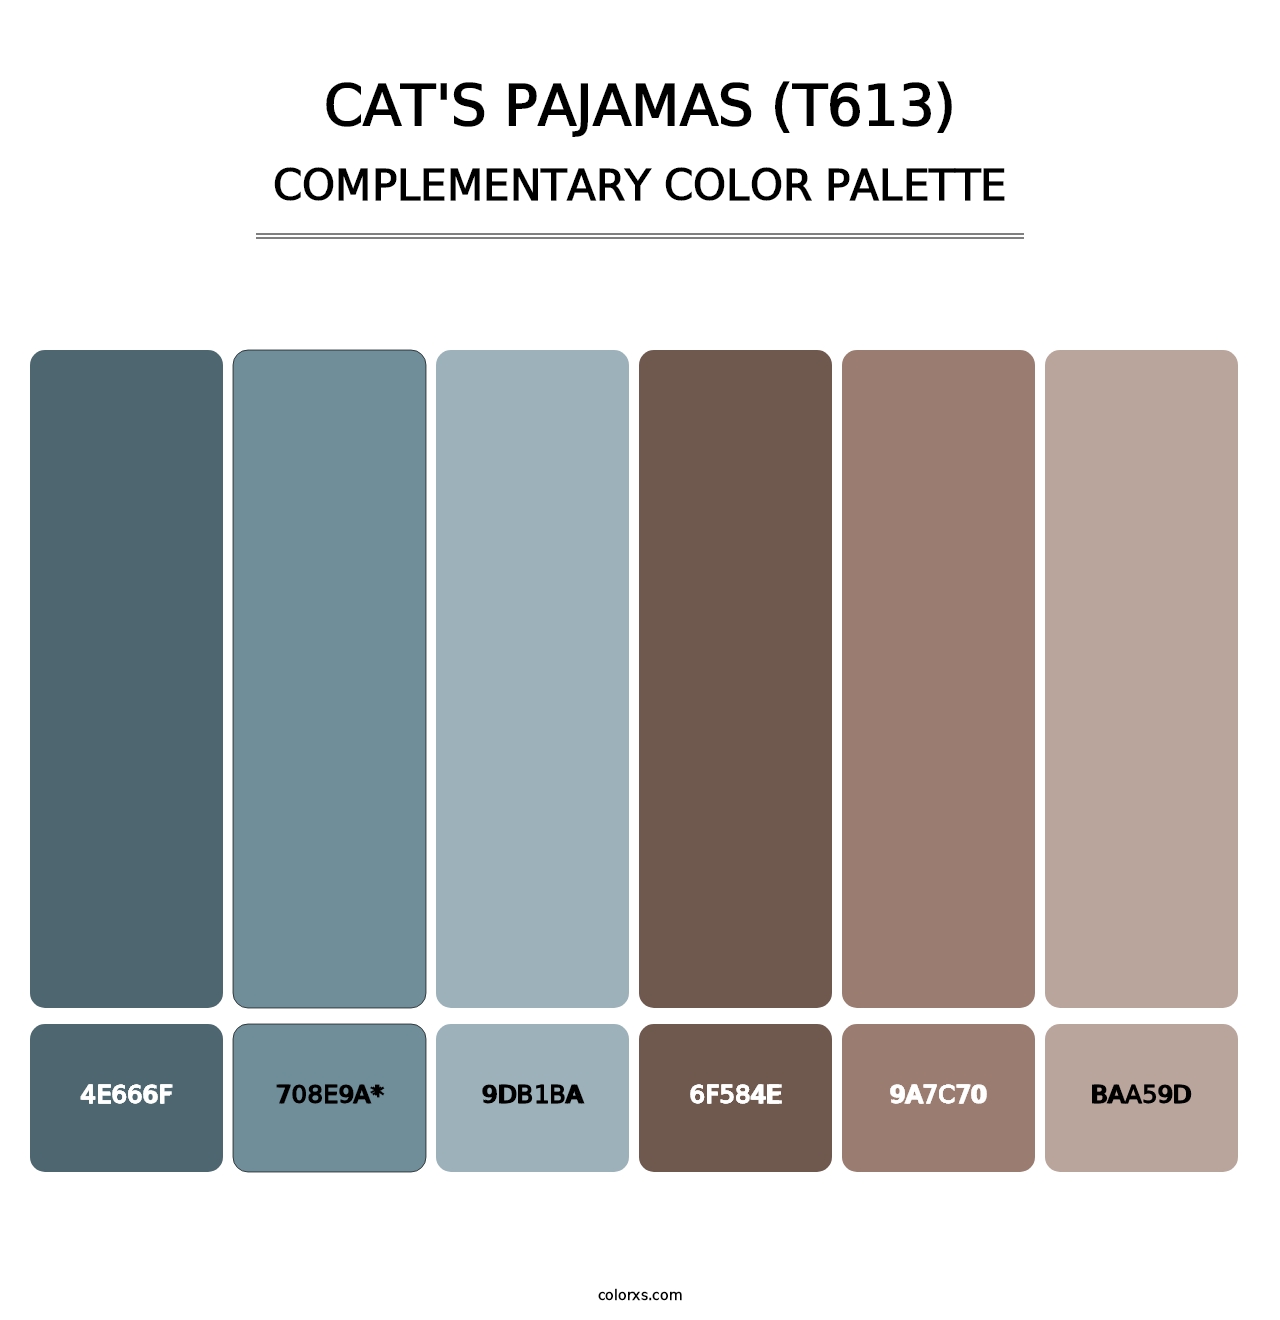 Cat's Pajamas (T613) - Complementary Color Palette